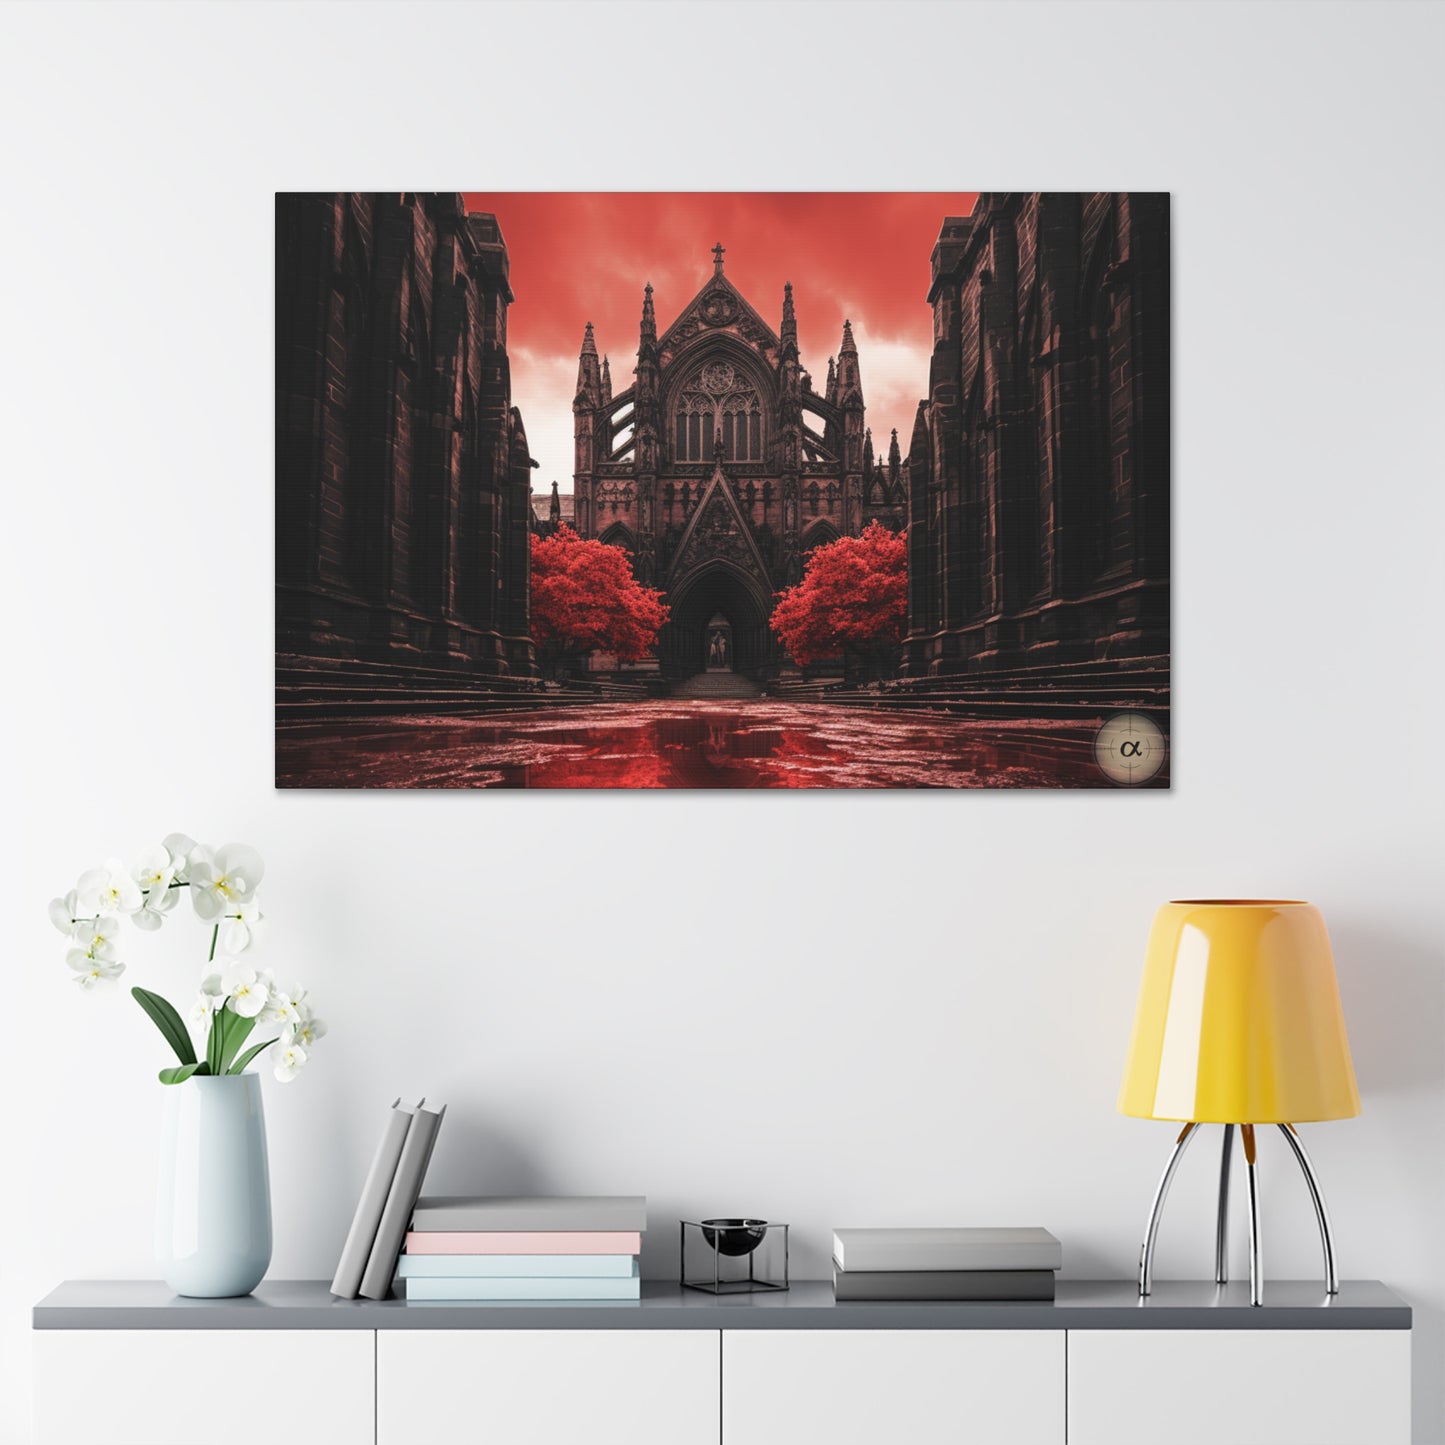 Art by Kendyll: "Cathedral in Red" on Canvas